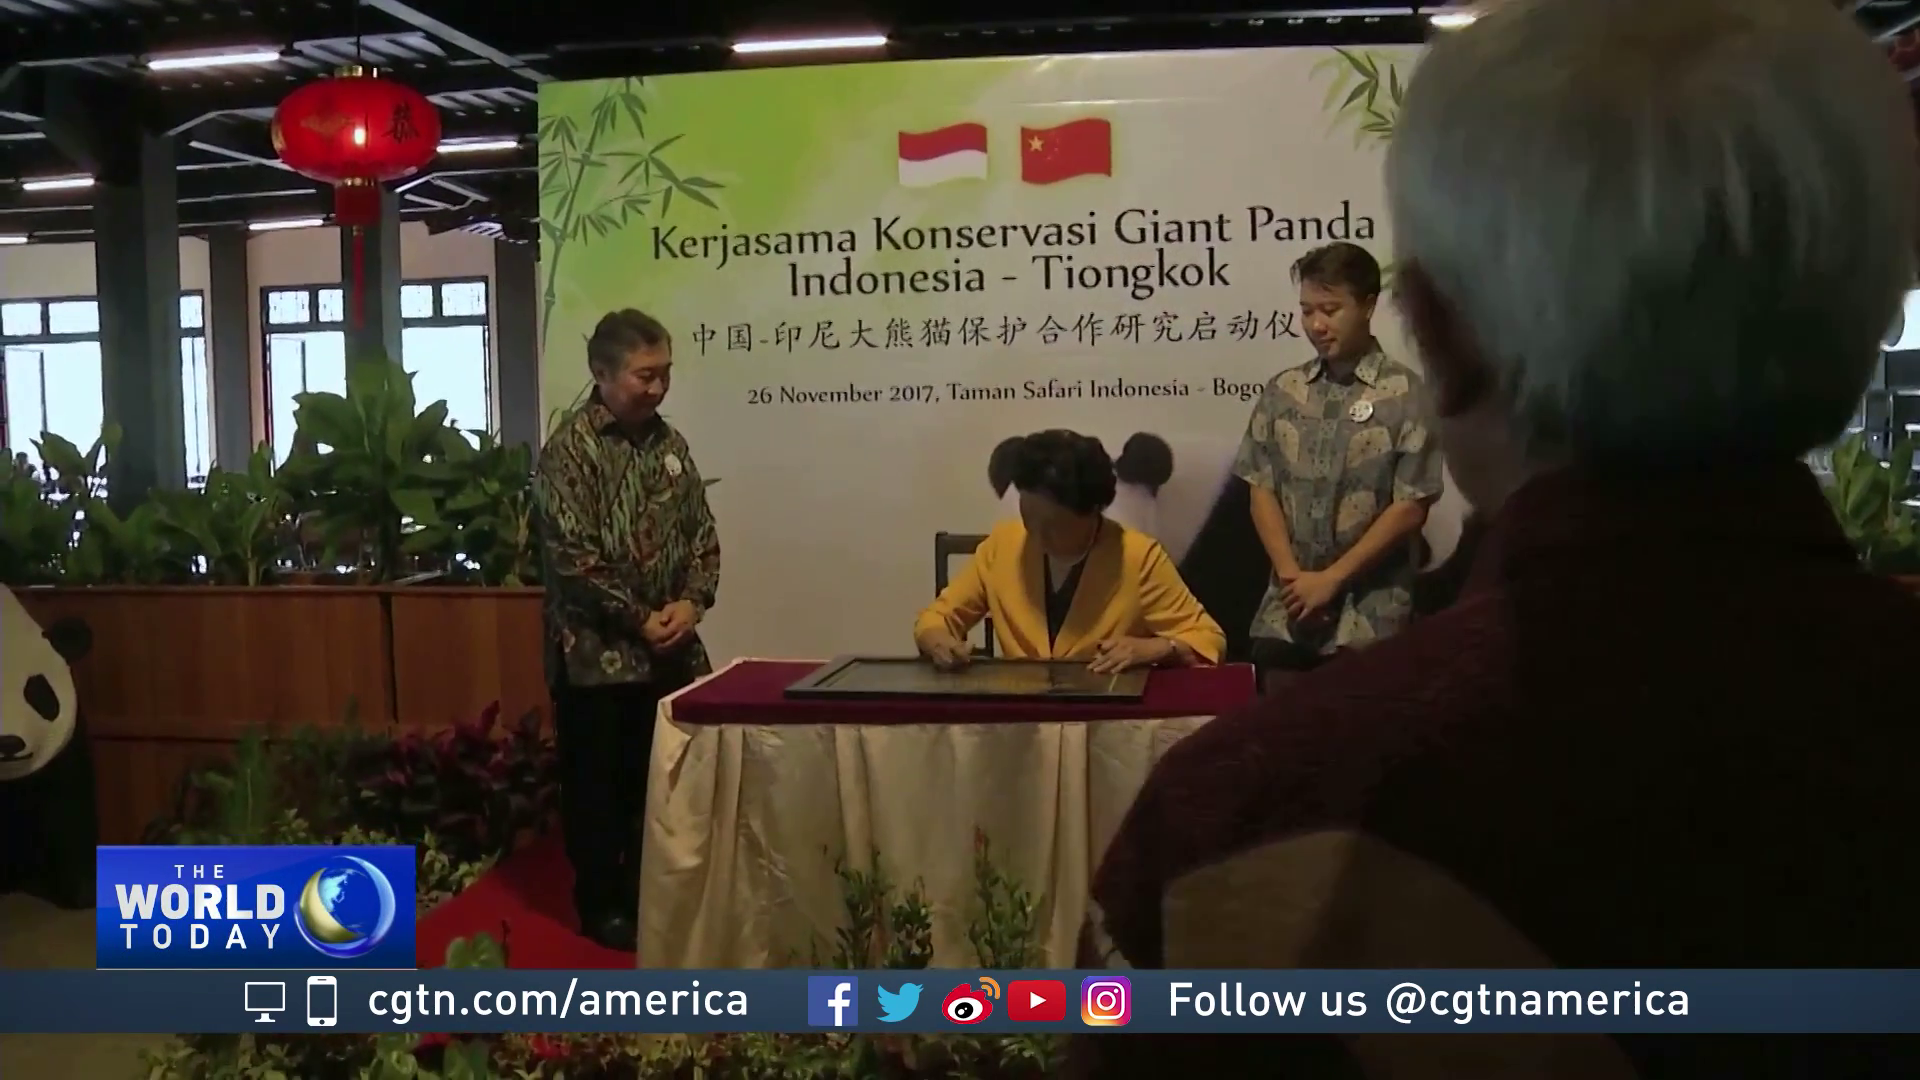 Panda in Indonesia - officiated by Chinese Vice Premier Liu Yandong 20171126 -02.png